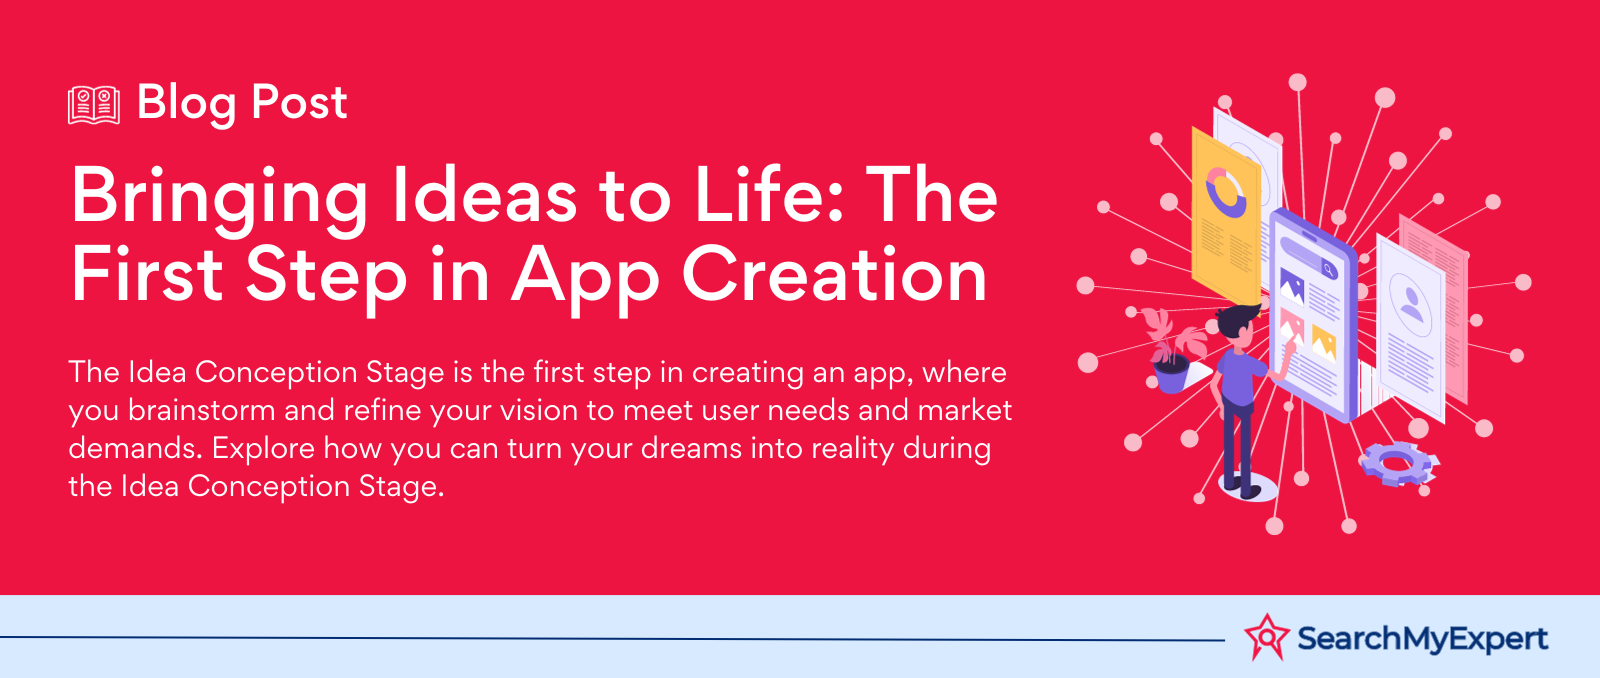 Bringing Ideas to Life: The First Step in App Creation